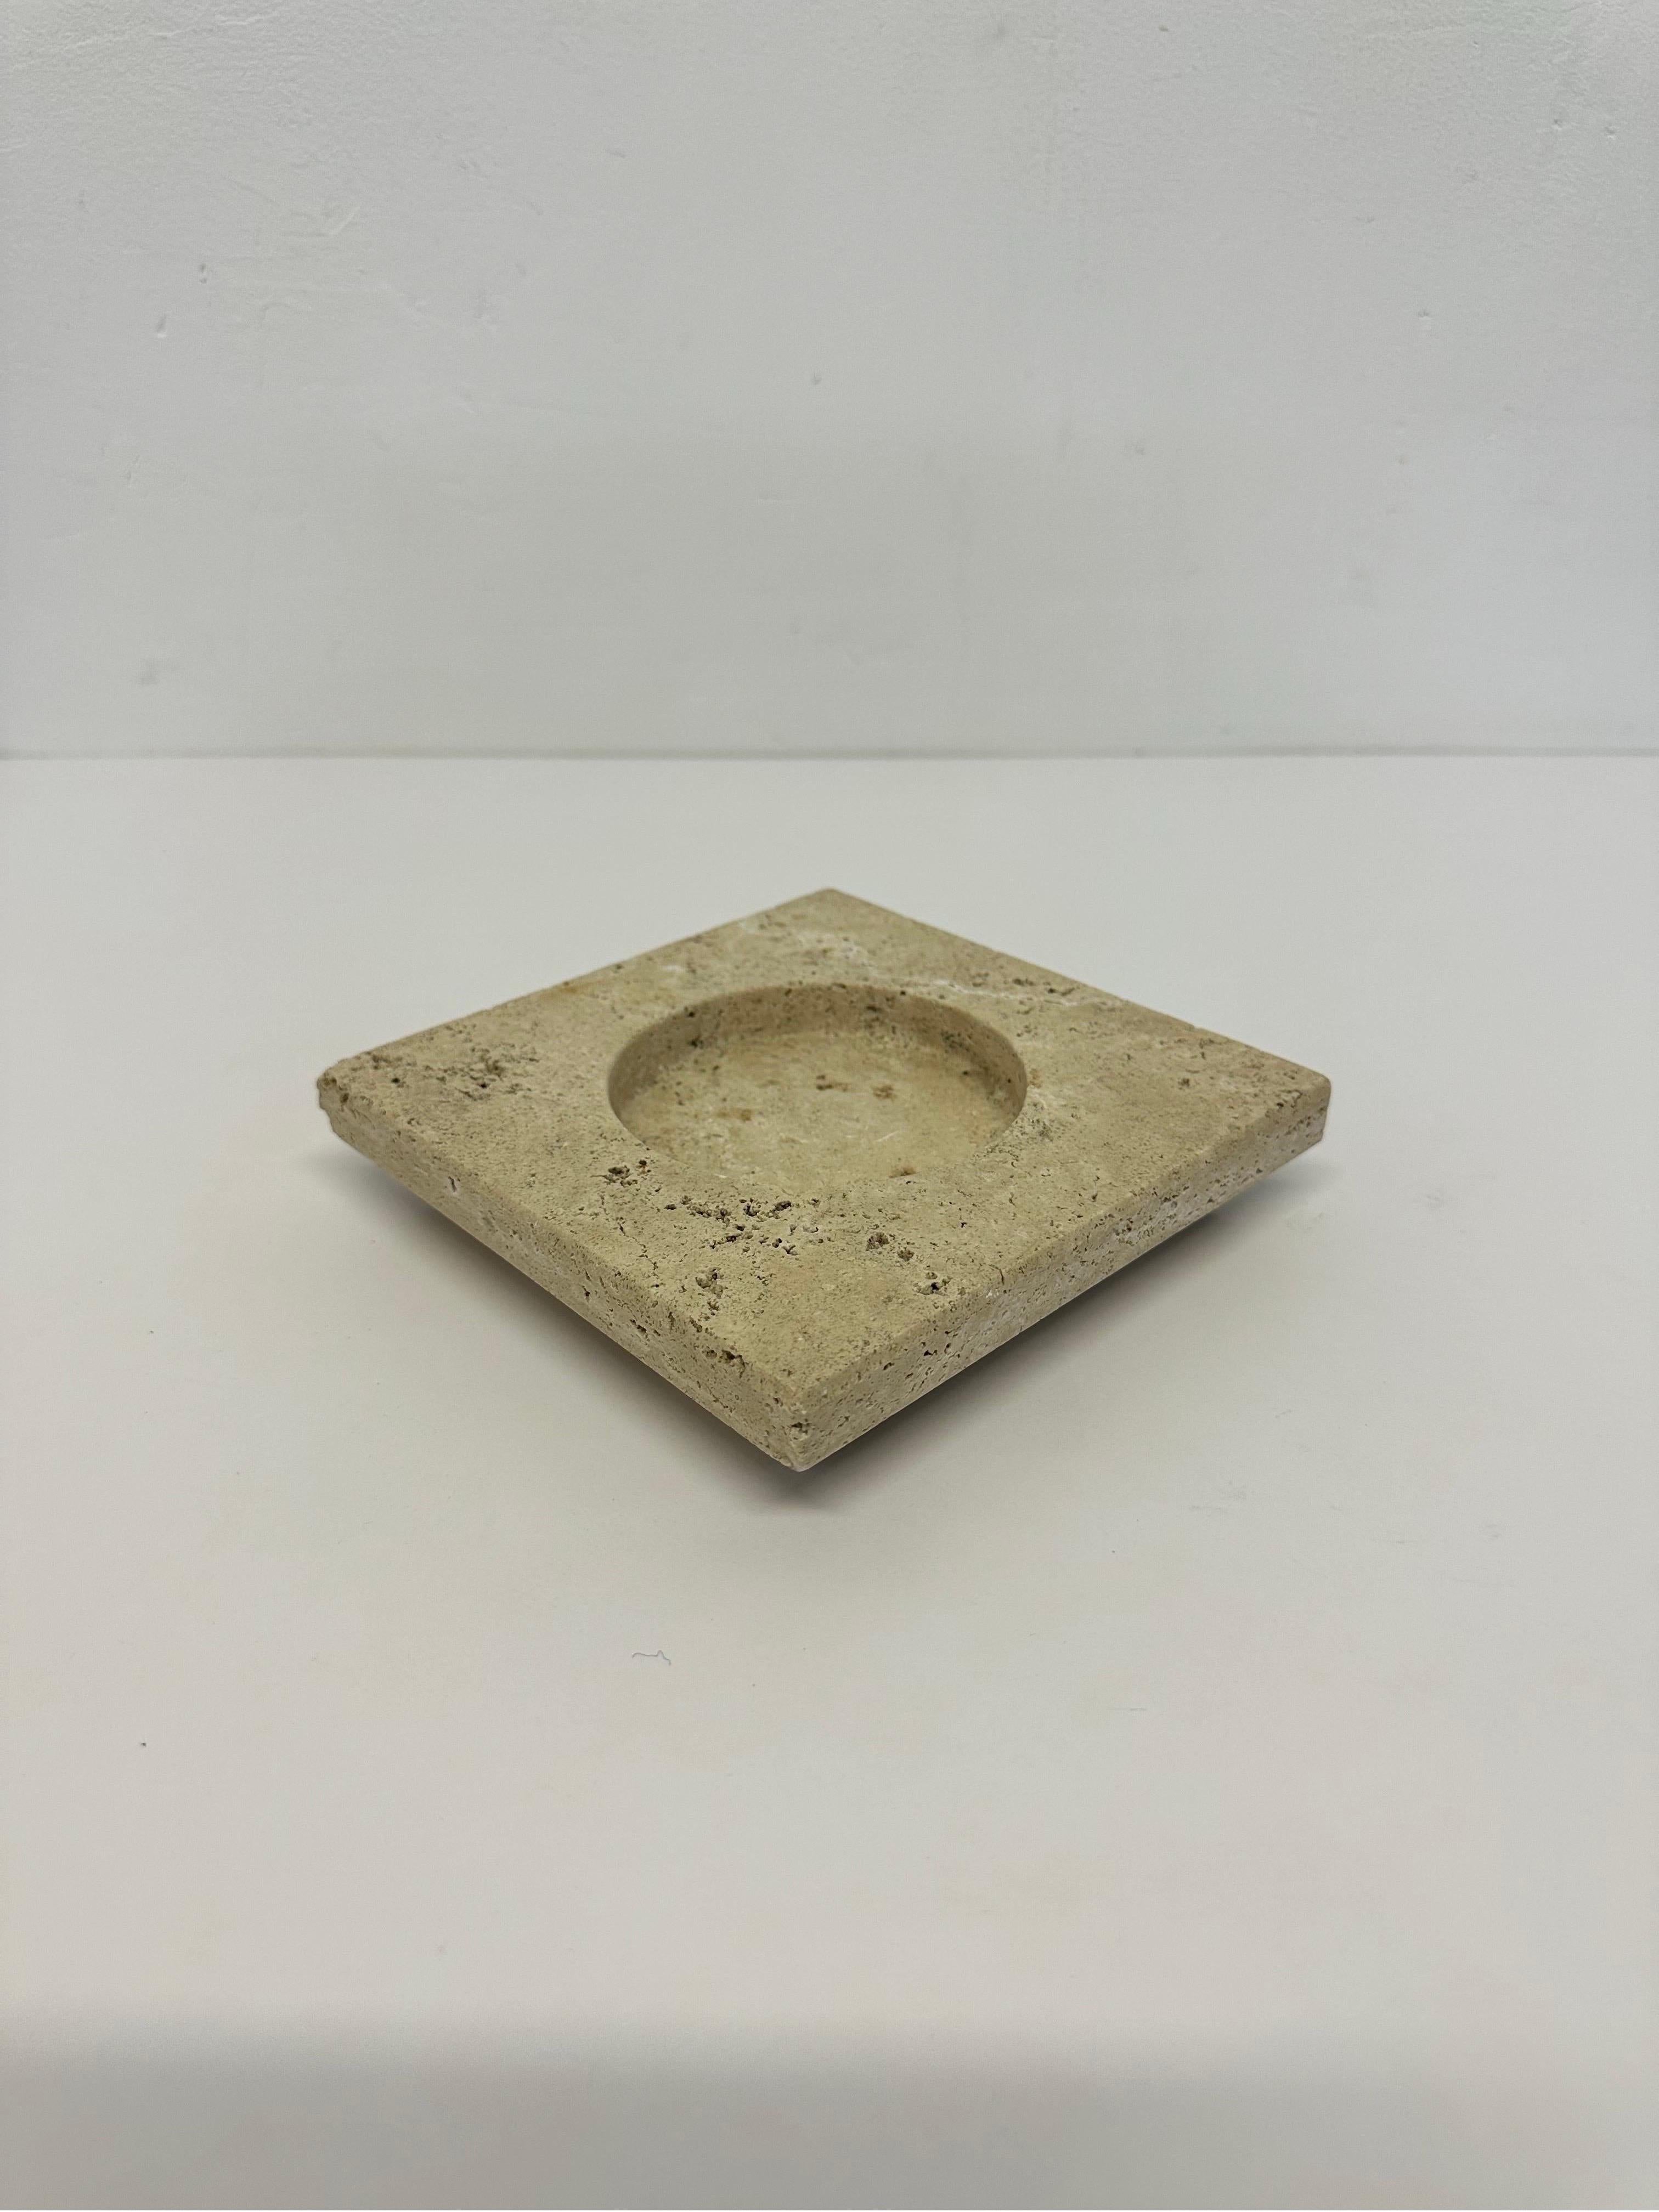 Italian travertine ash tray or catchall circa 1970s.  The bottom of travertine has a suede table top protector.